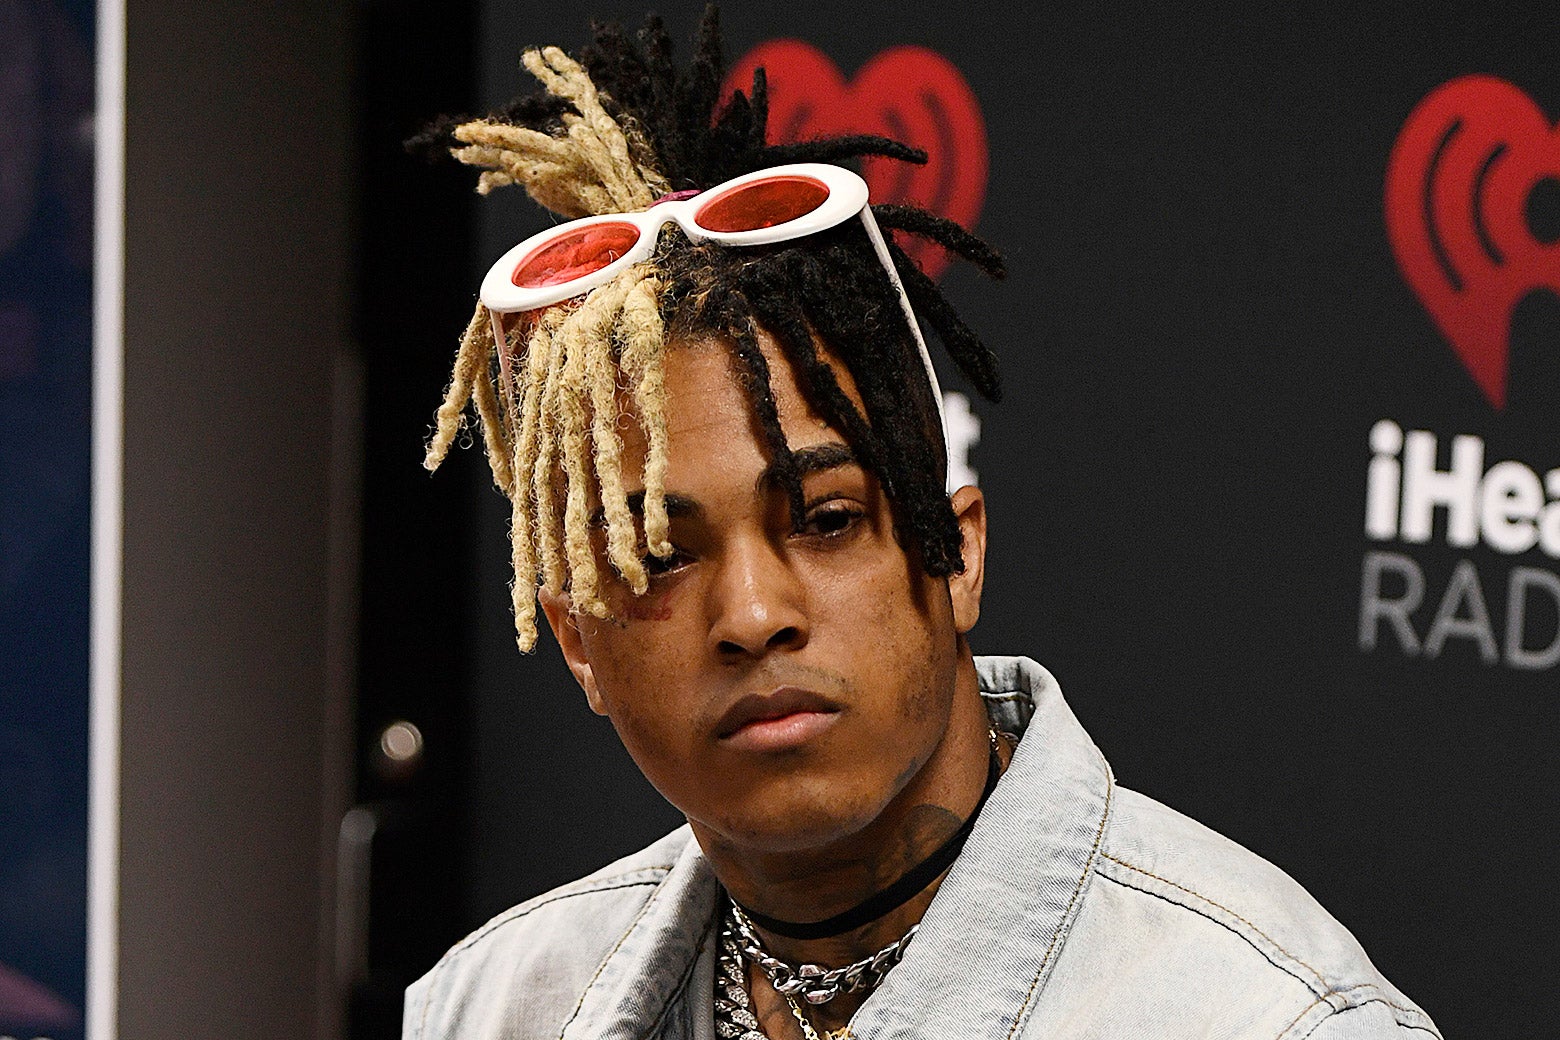 XXXTentacion visits iHeart radio Station 103.5 The Beat on May 26, 2017 in Fort Lauderdale, Florida.